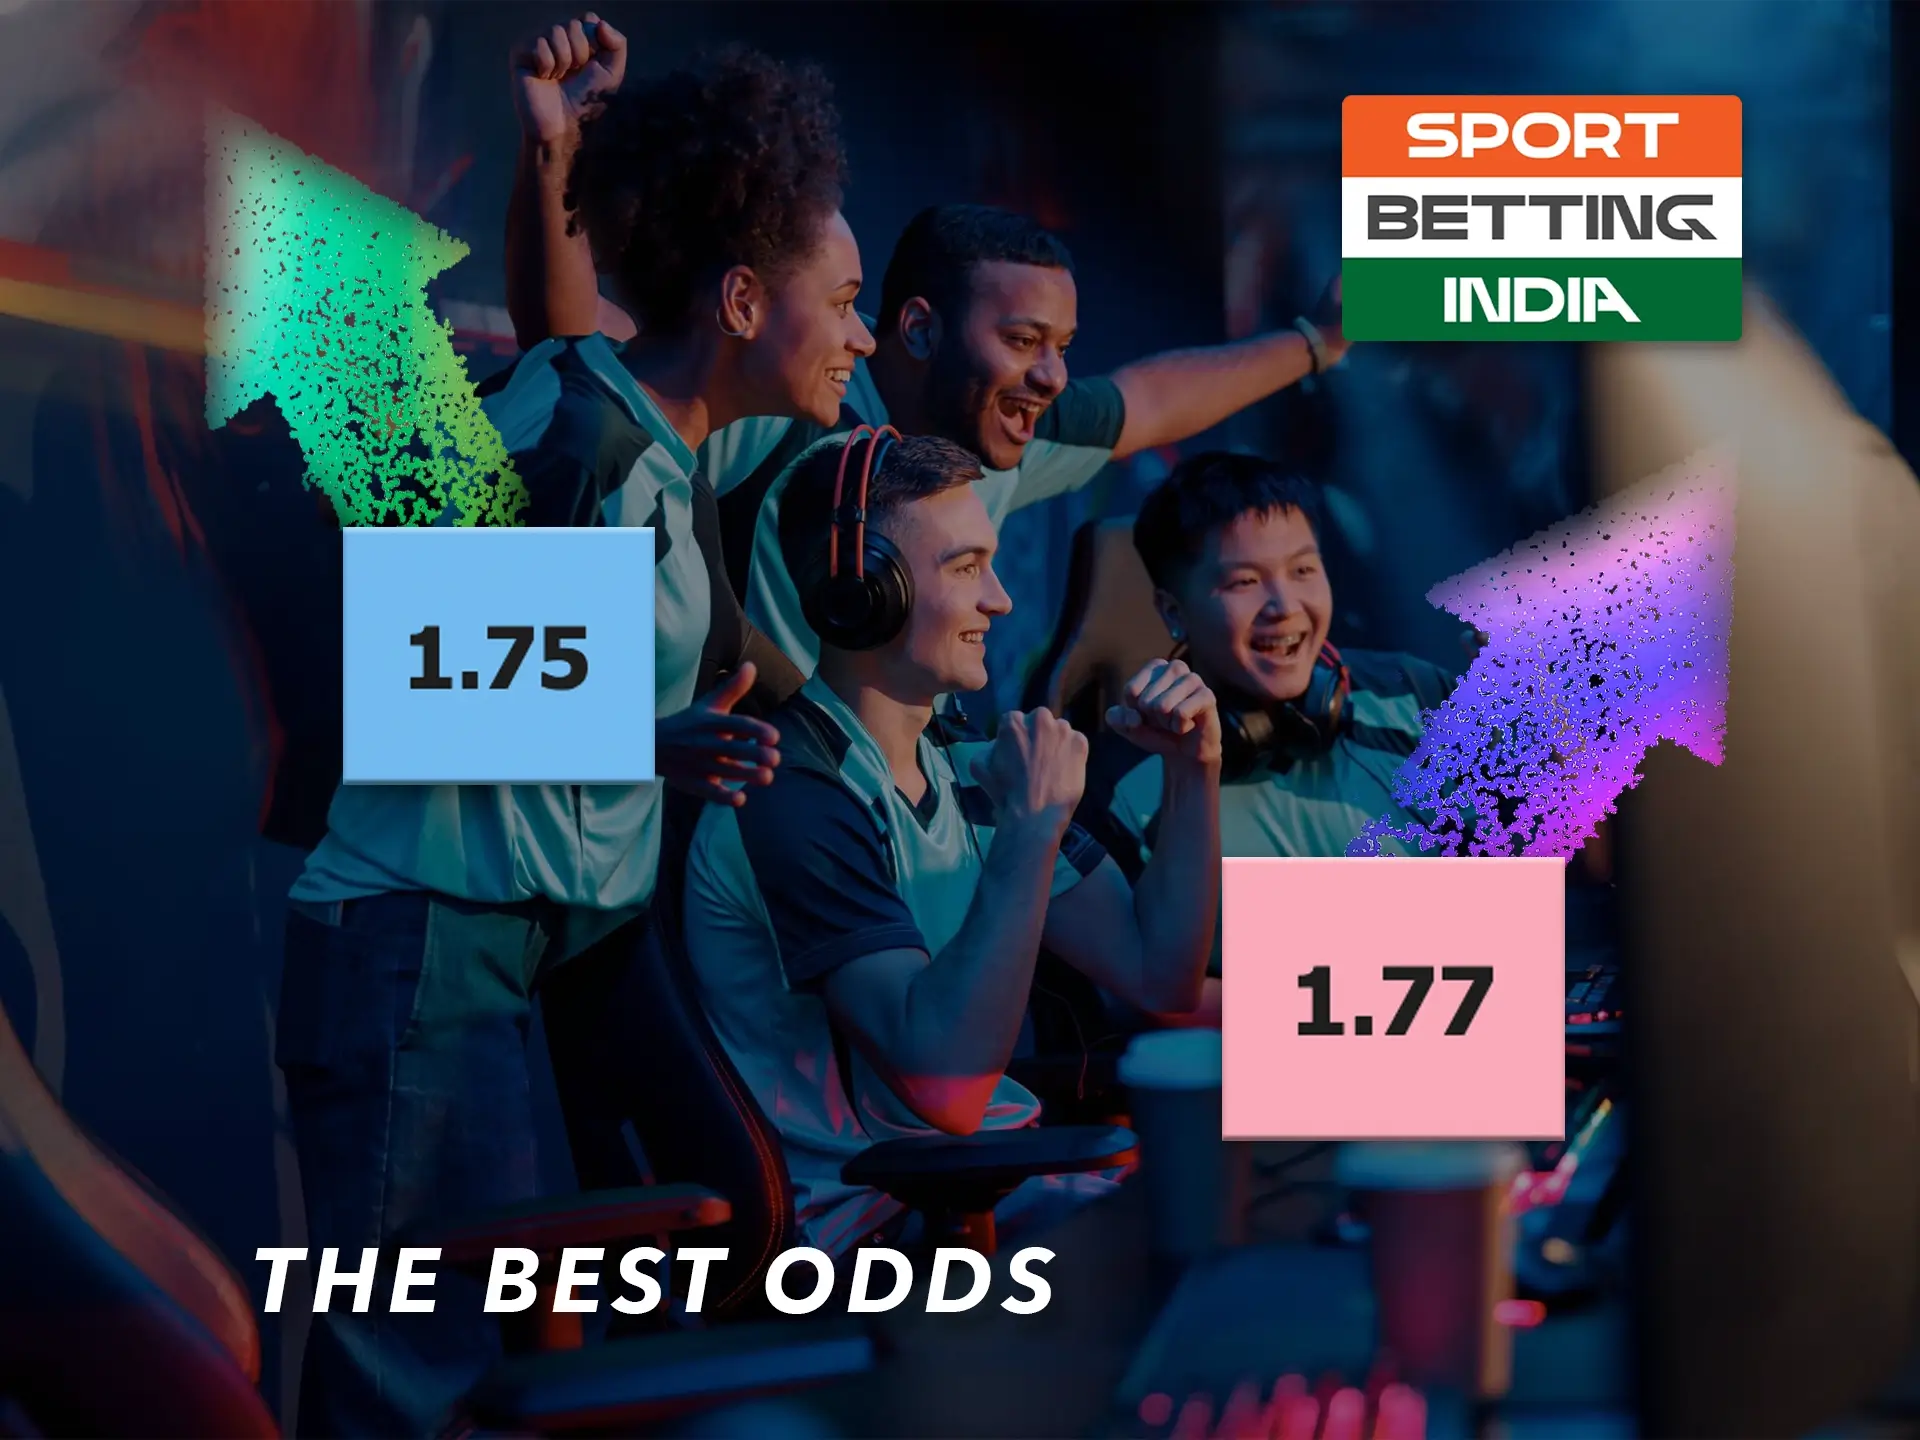 Find the highest odds on cyber sports and make predictions.